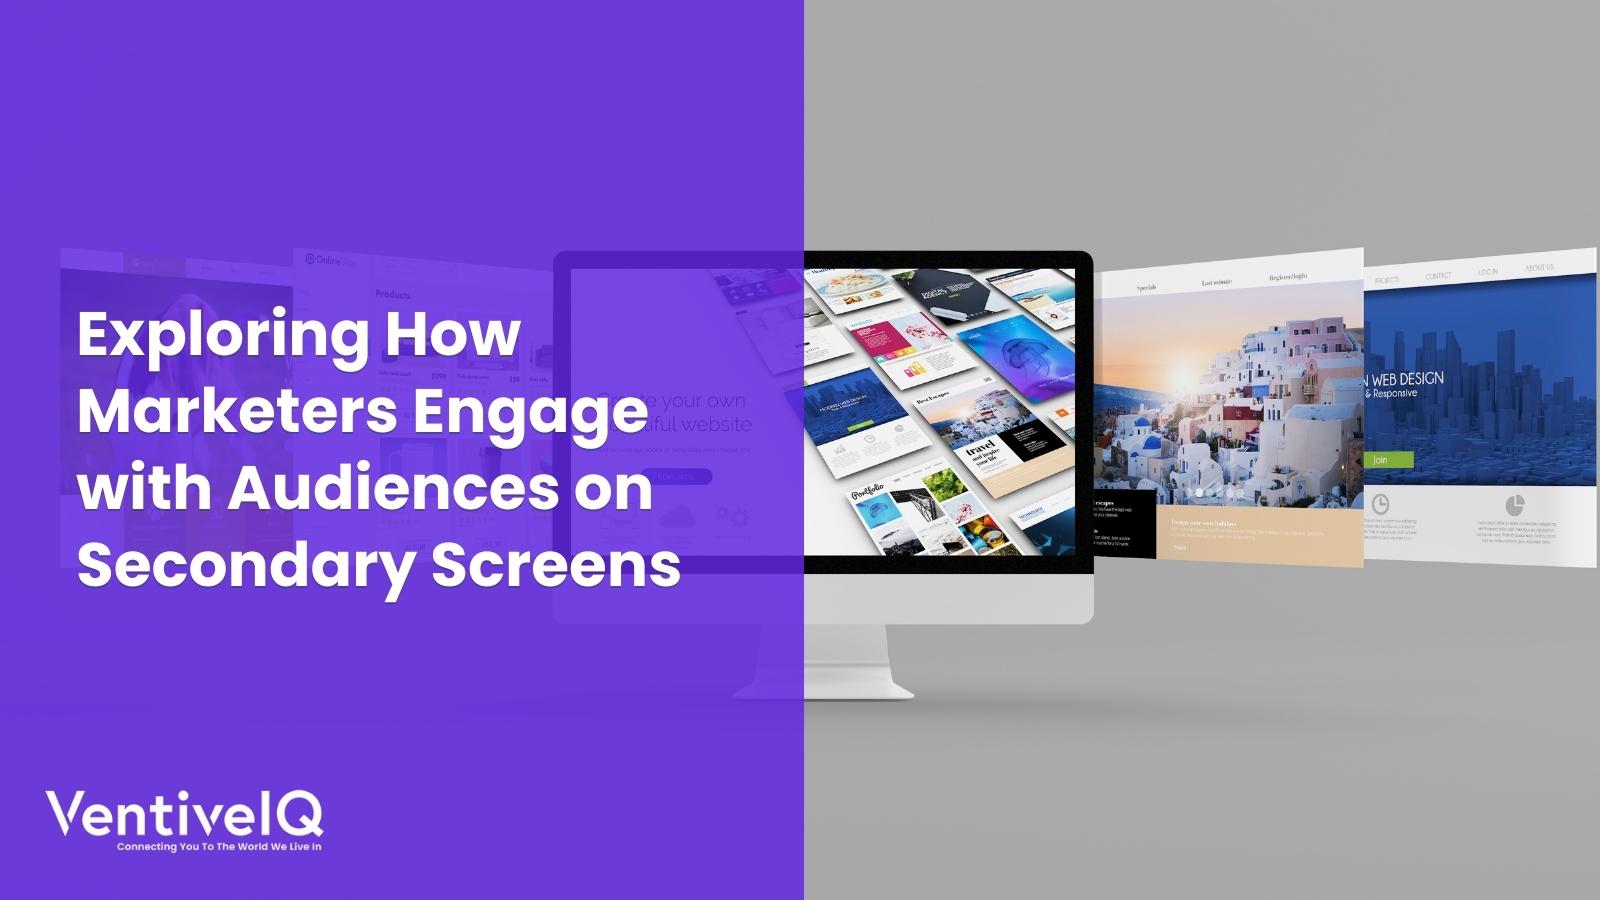 How Marketers Engage with Audiences on Secondary Screens